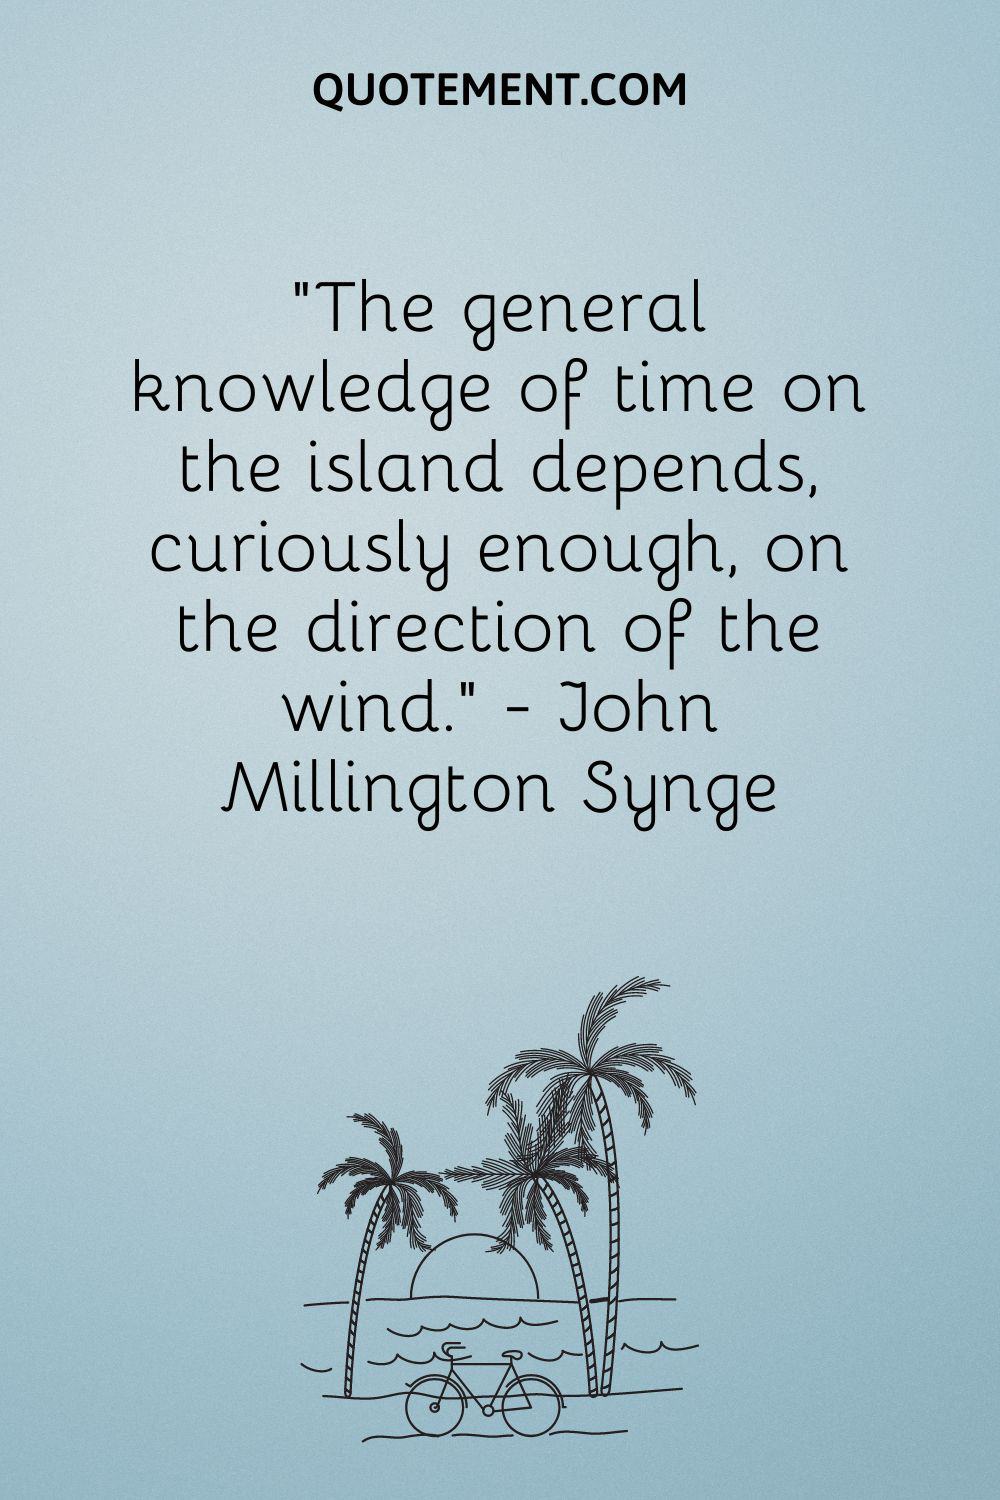 “The general knowledge of time on the island depends, curiously enough, on the direction of the wind.” — John Millington Synge